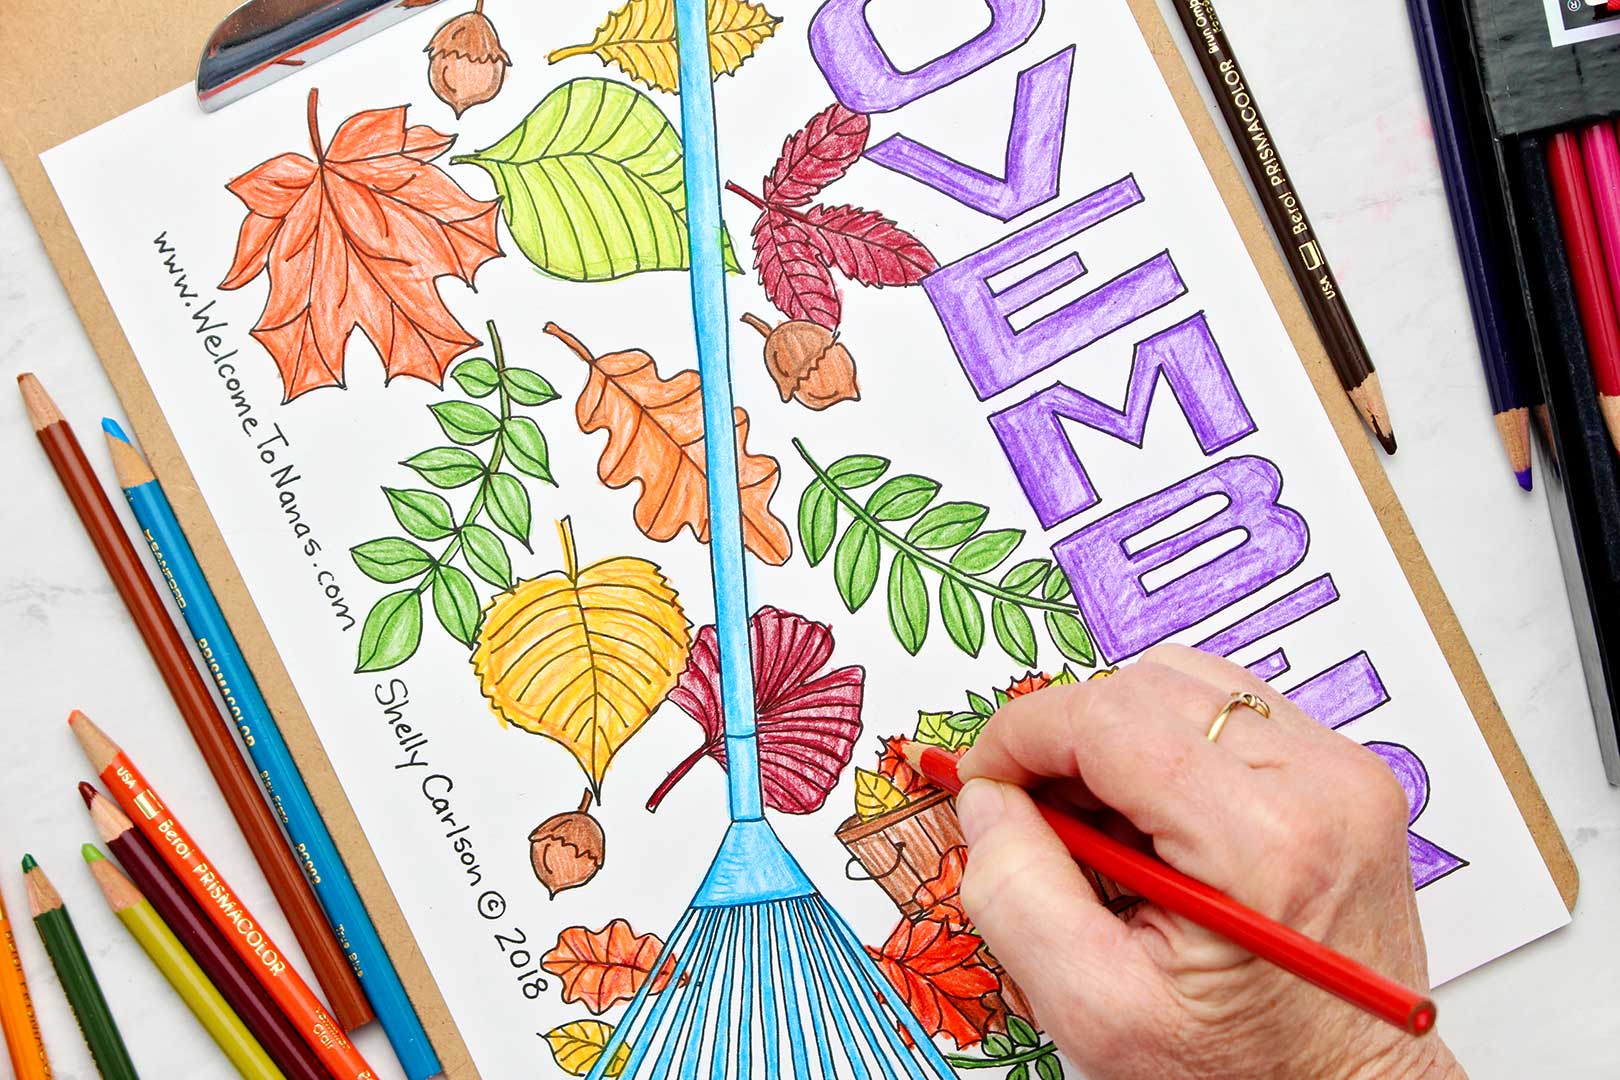 Hand coloring finishing touches on November coloring page.